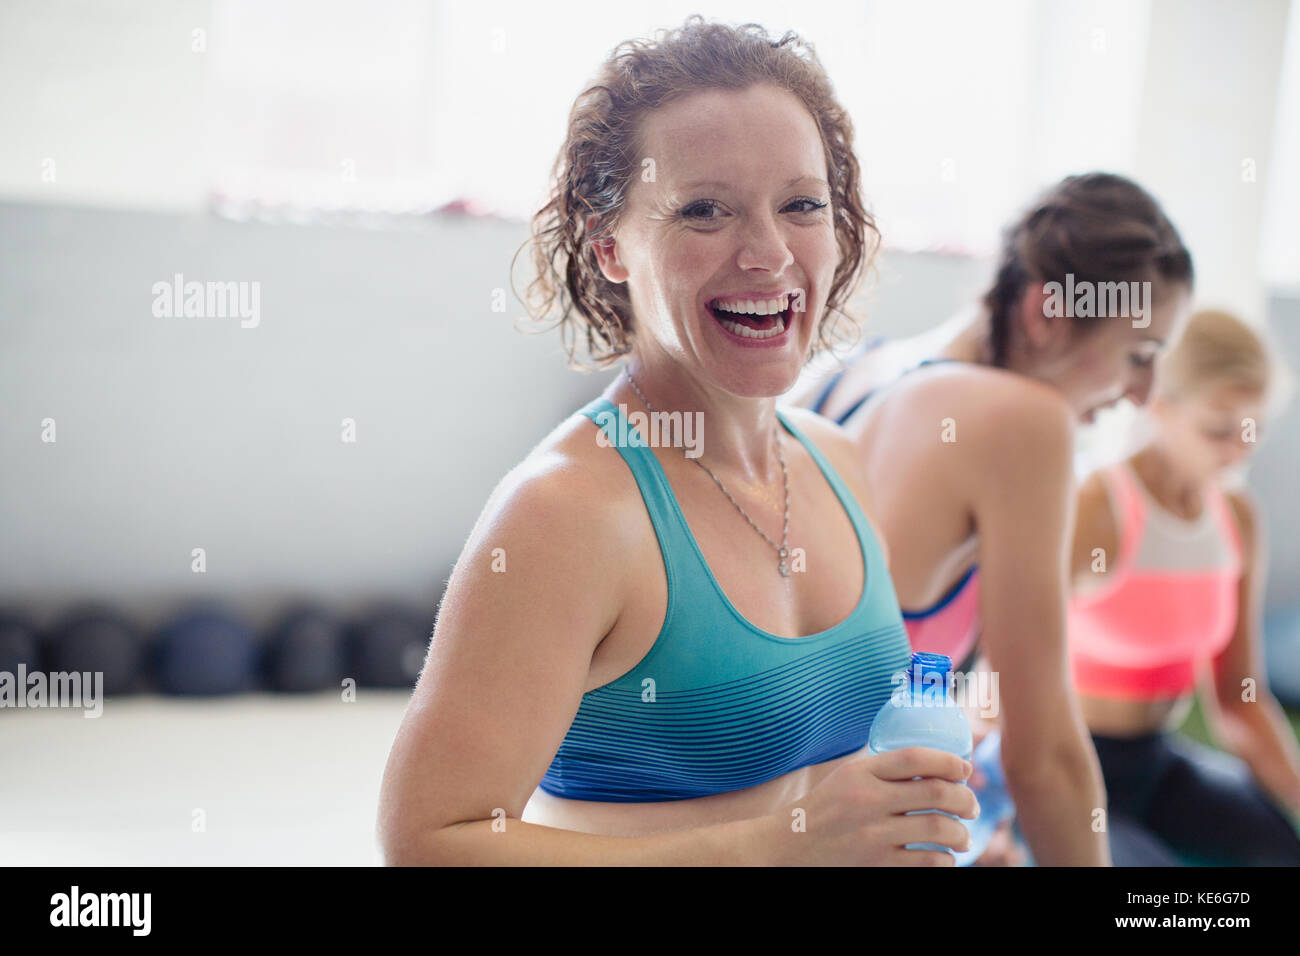 Portrait smiling, laughing woman drinking water and resting post workout at gym Stock Photo